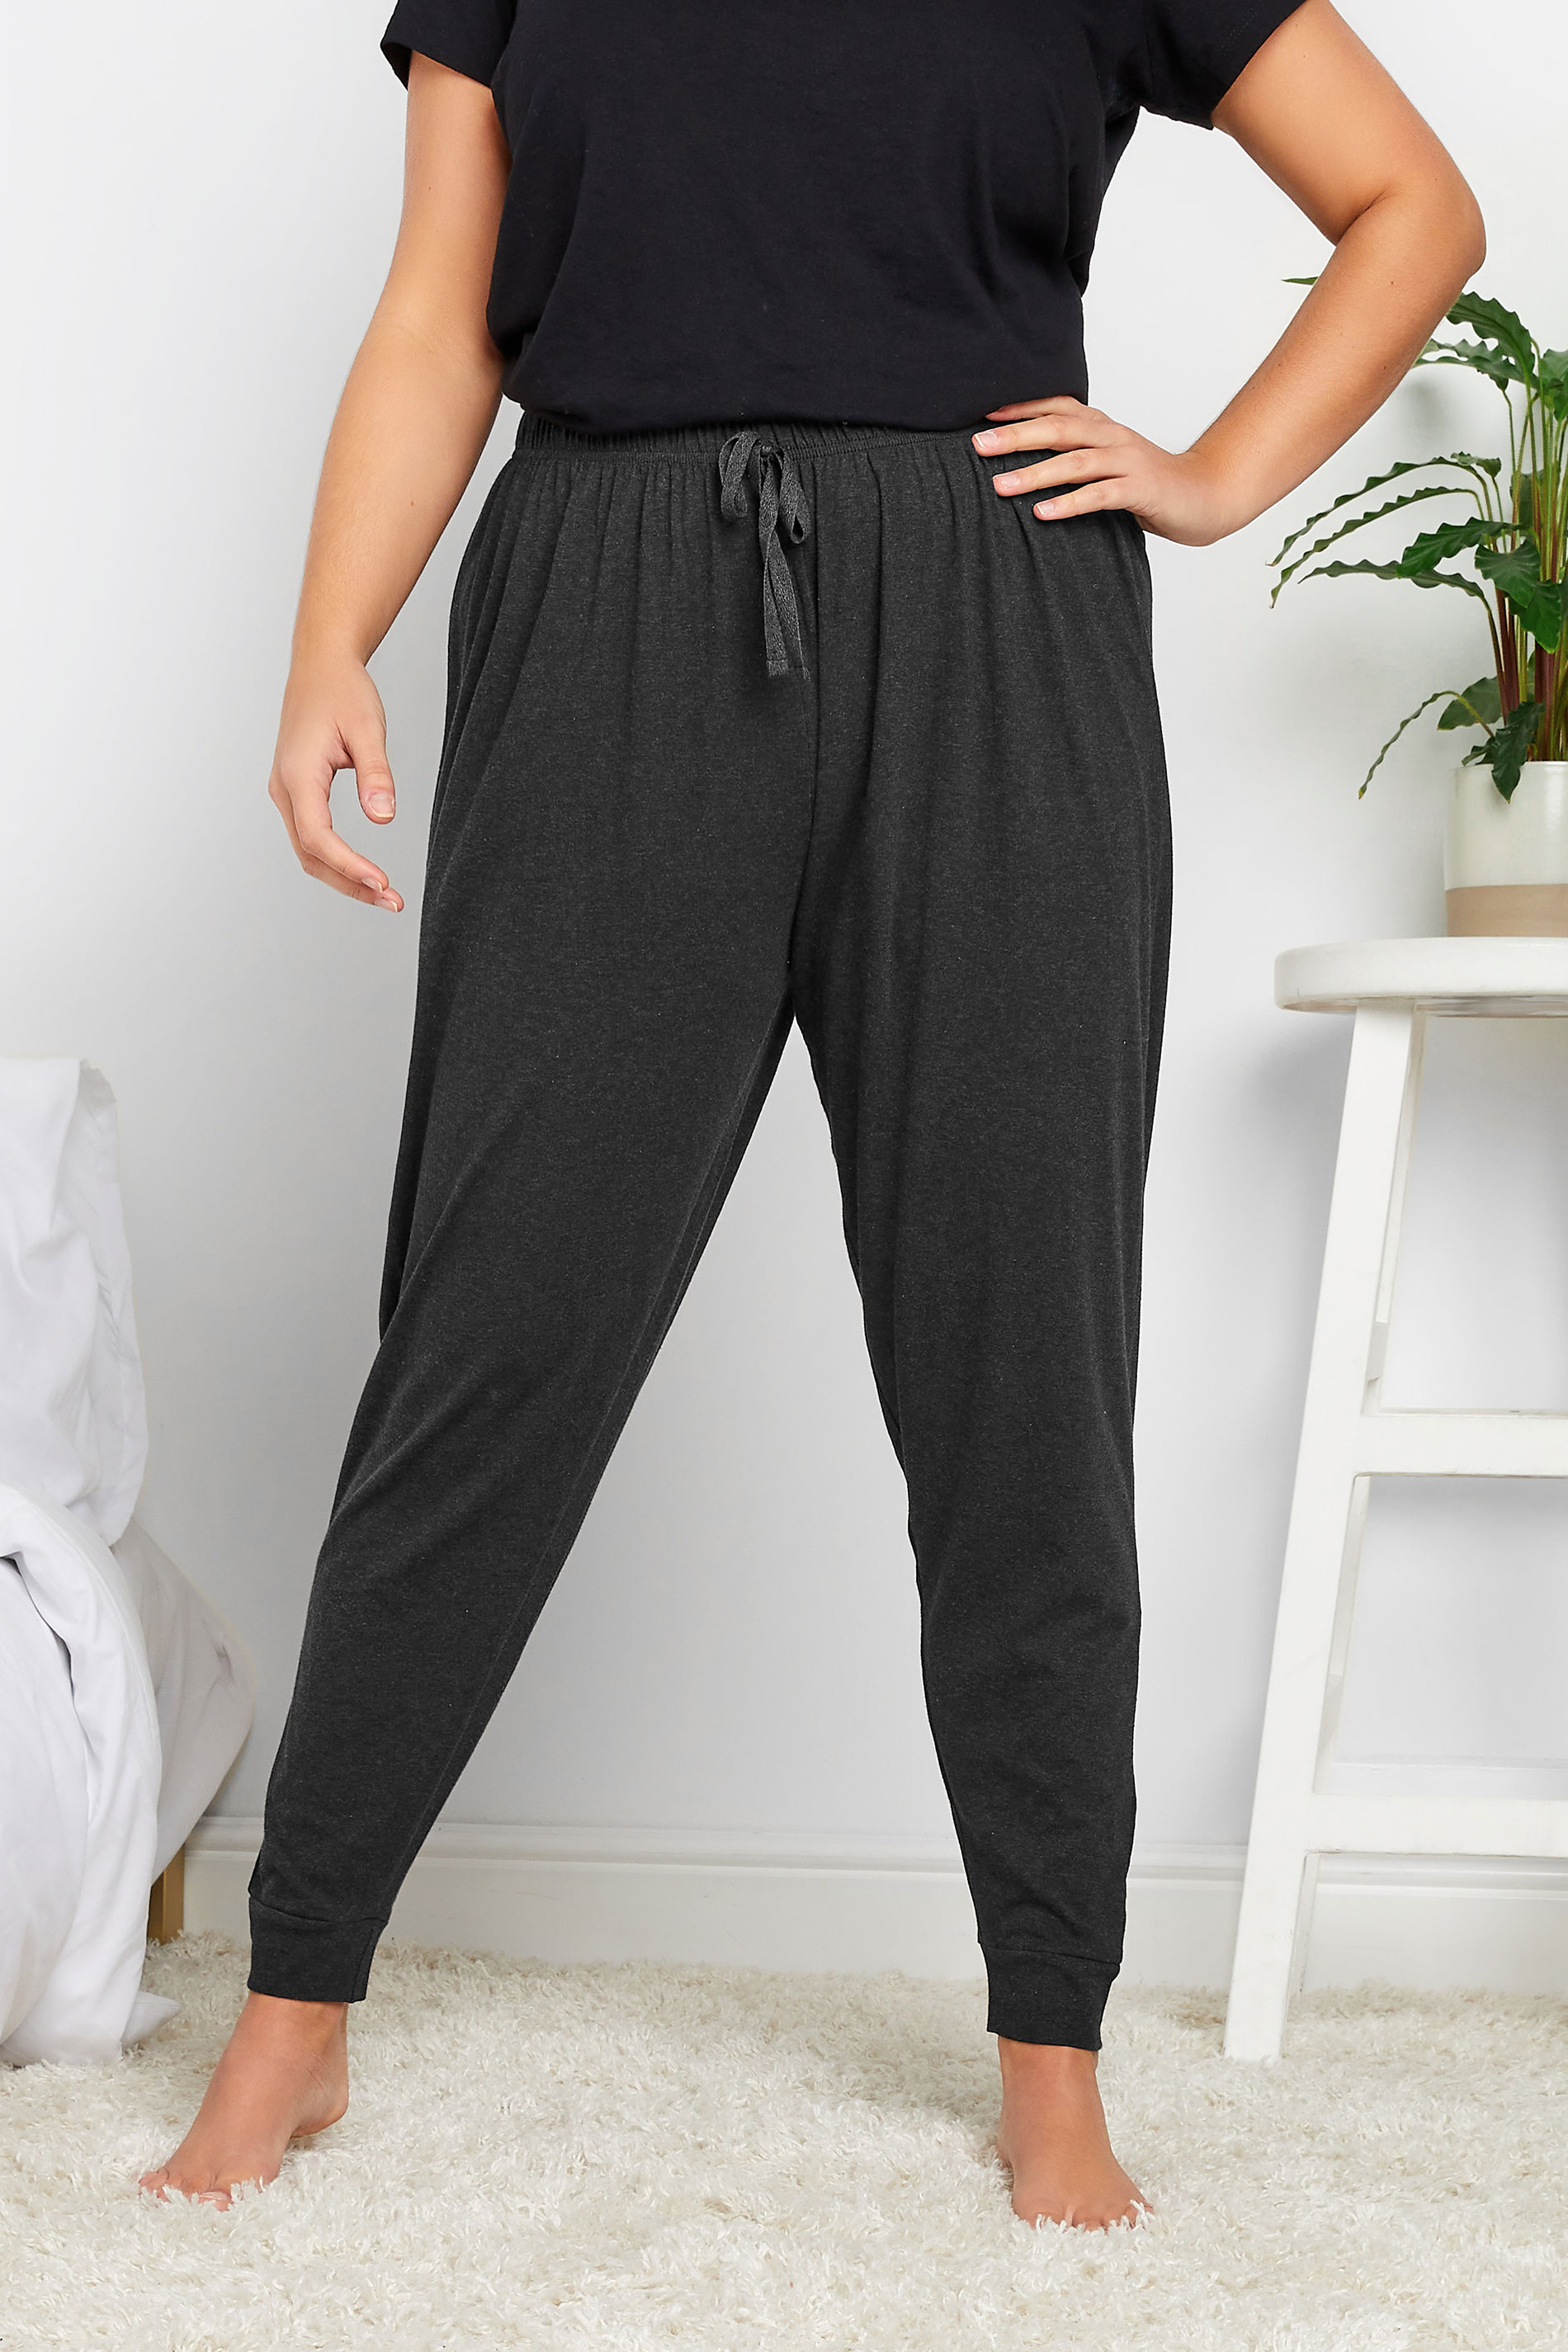 Plus Size Charcoal Grey Marl Cuffed Pyjama Bottoms | Yours Clothing 1